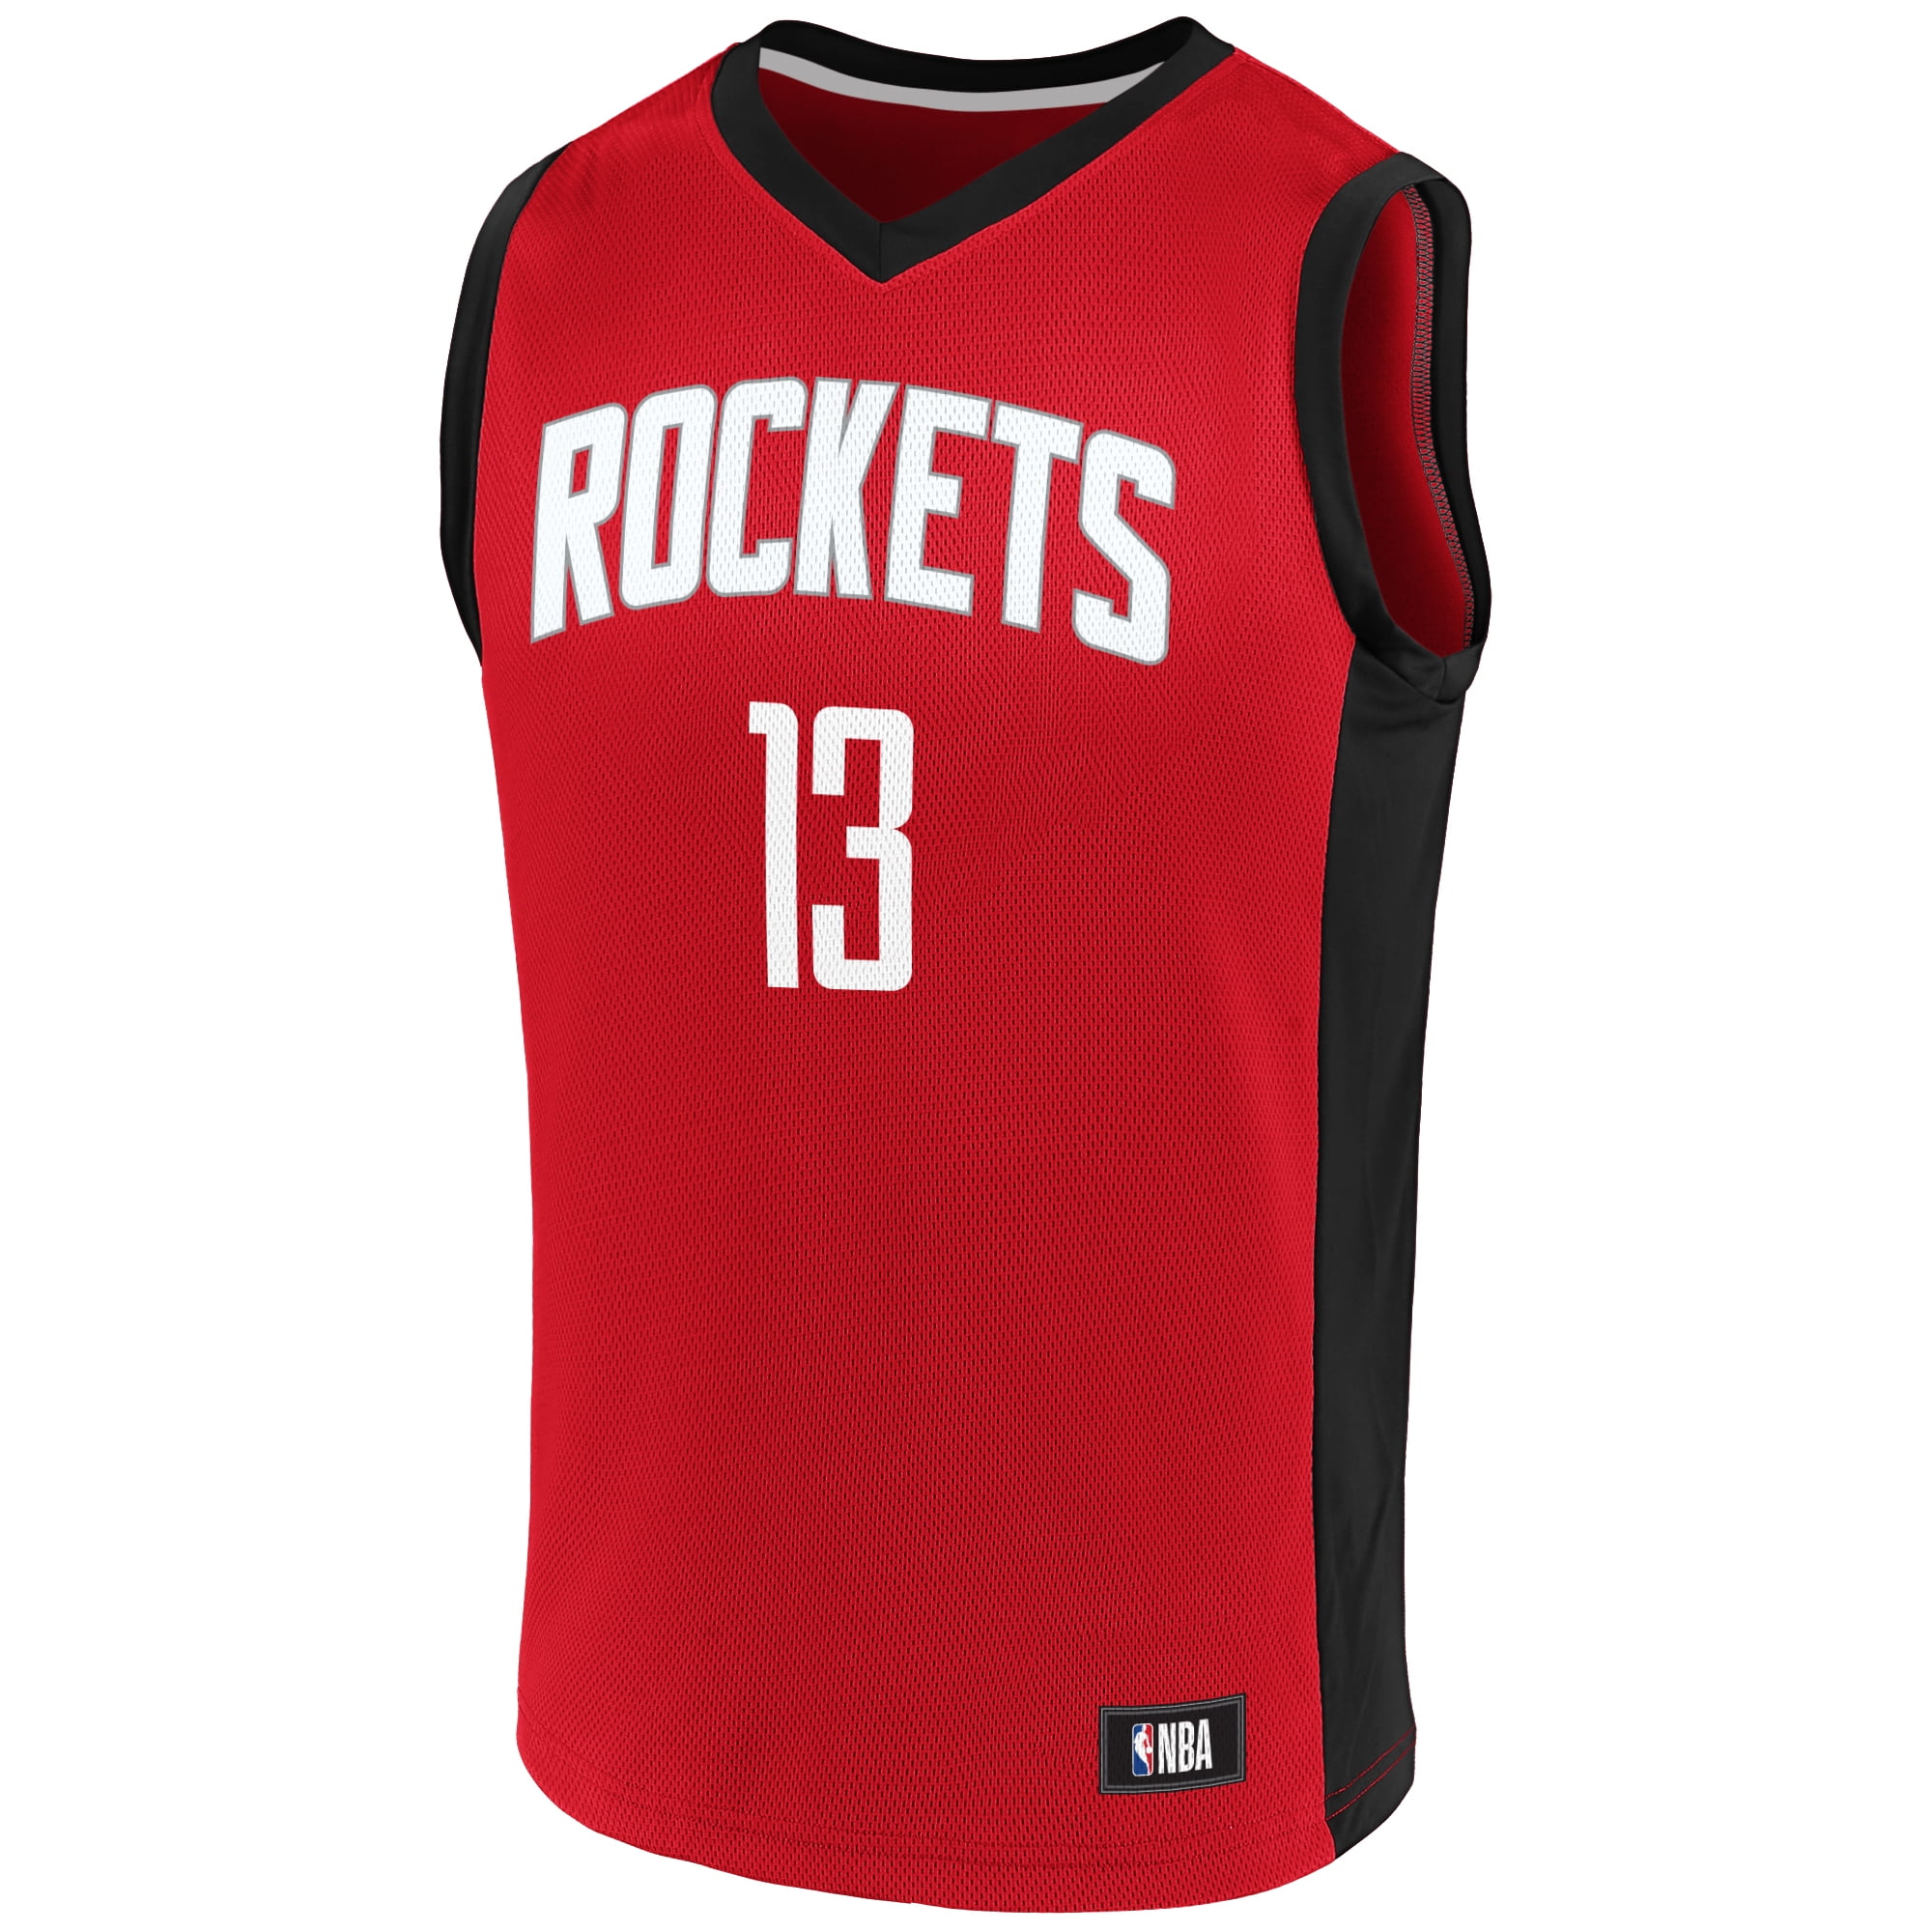 james harden jersey for sale